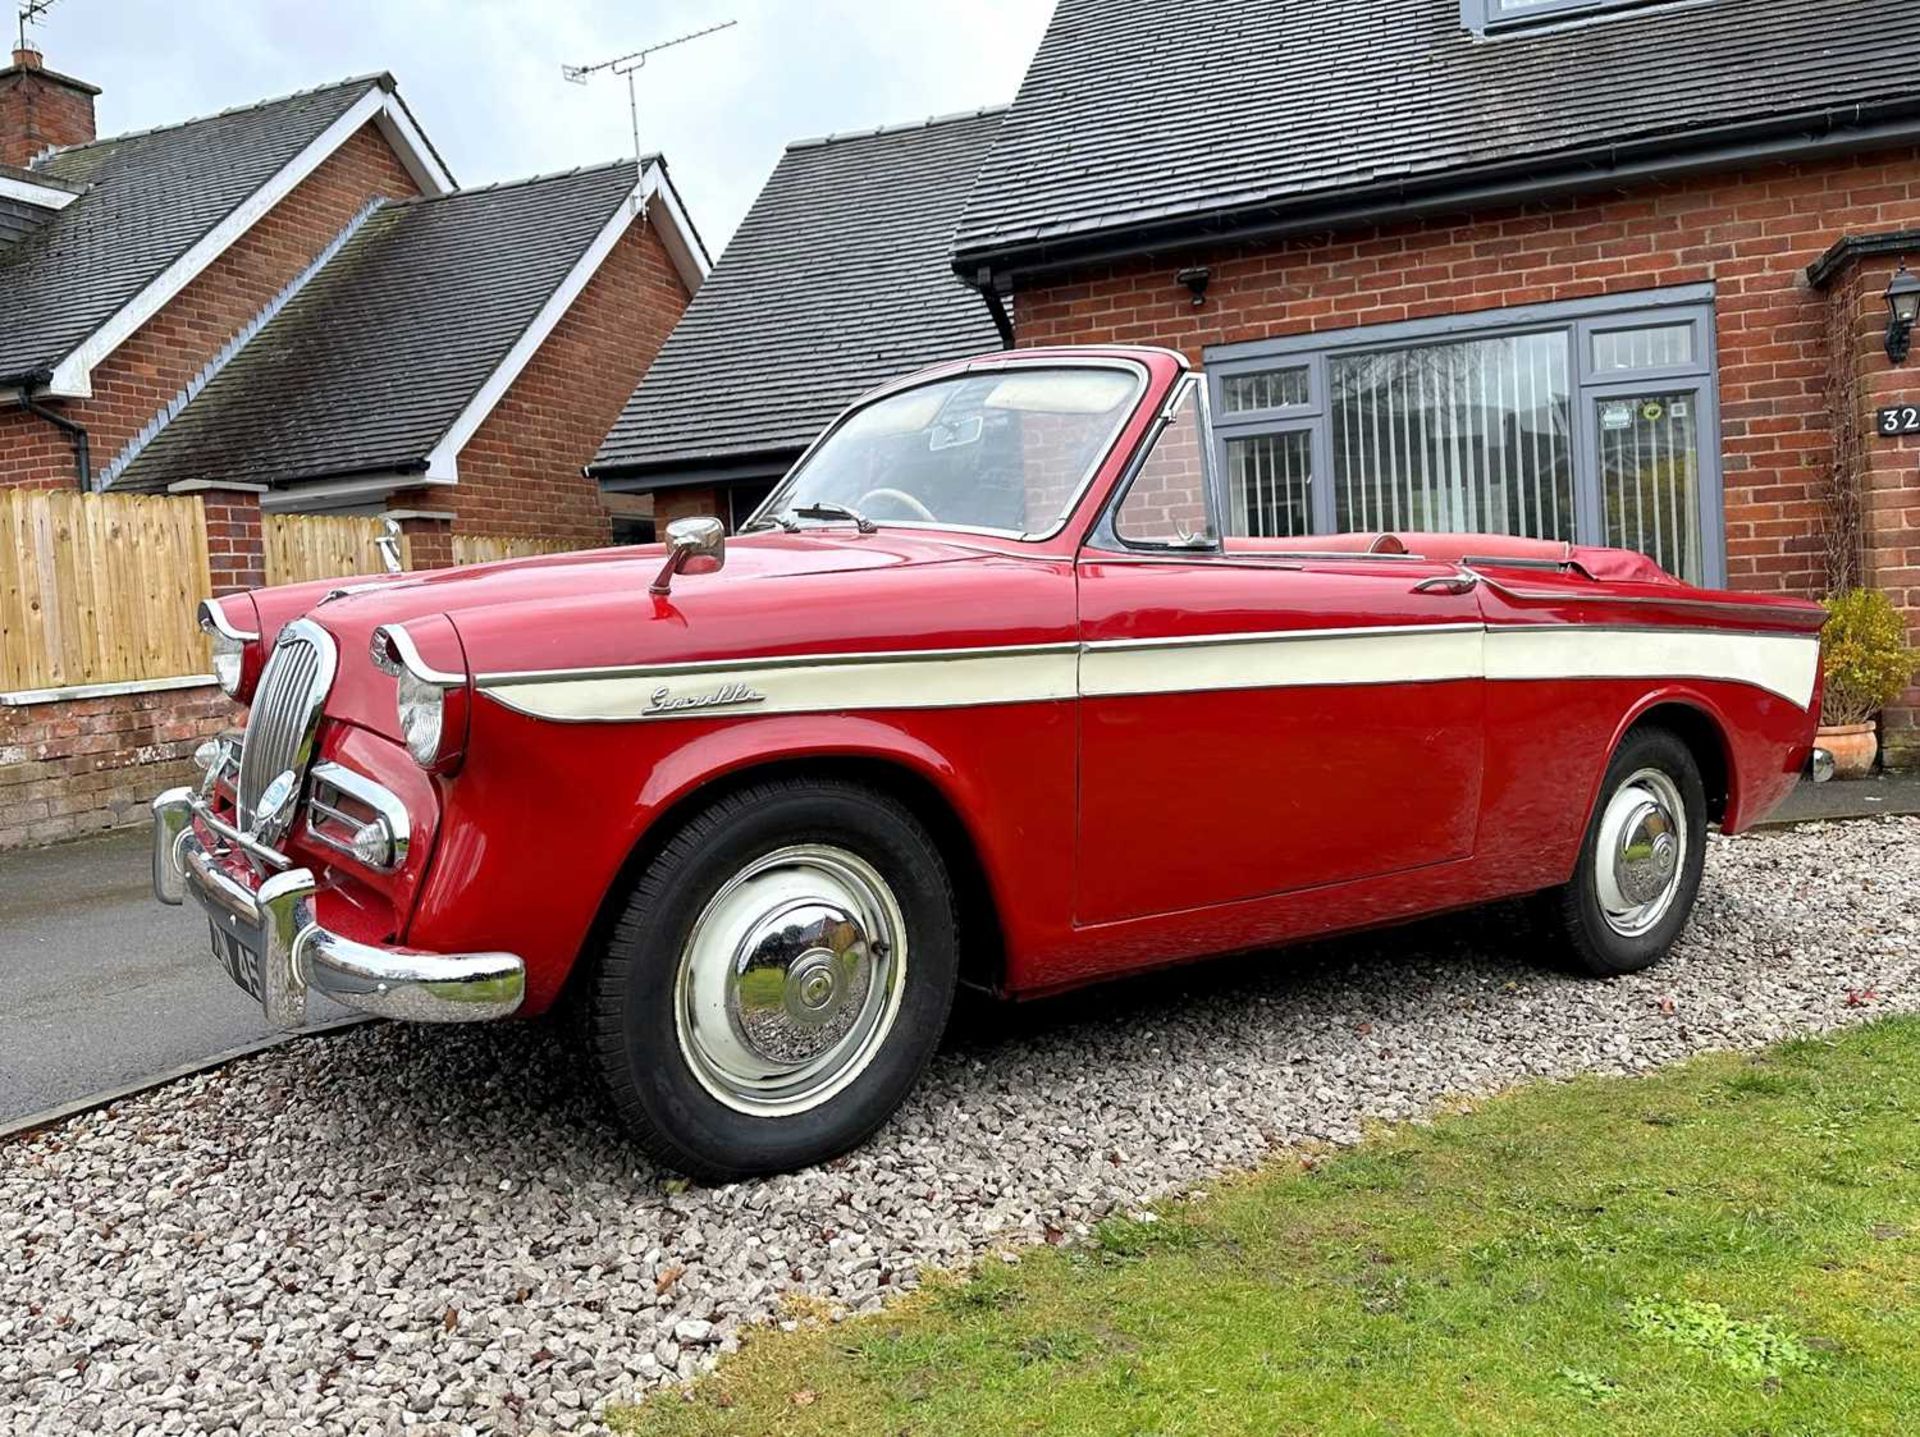 1961 Singer Gazelle Convertible Comes complete with overdrive, period radio and badge bar - Image 6 of 95